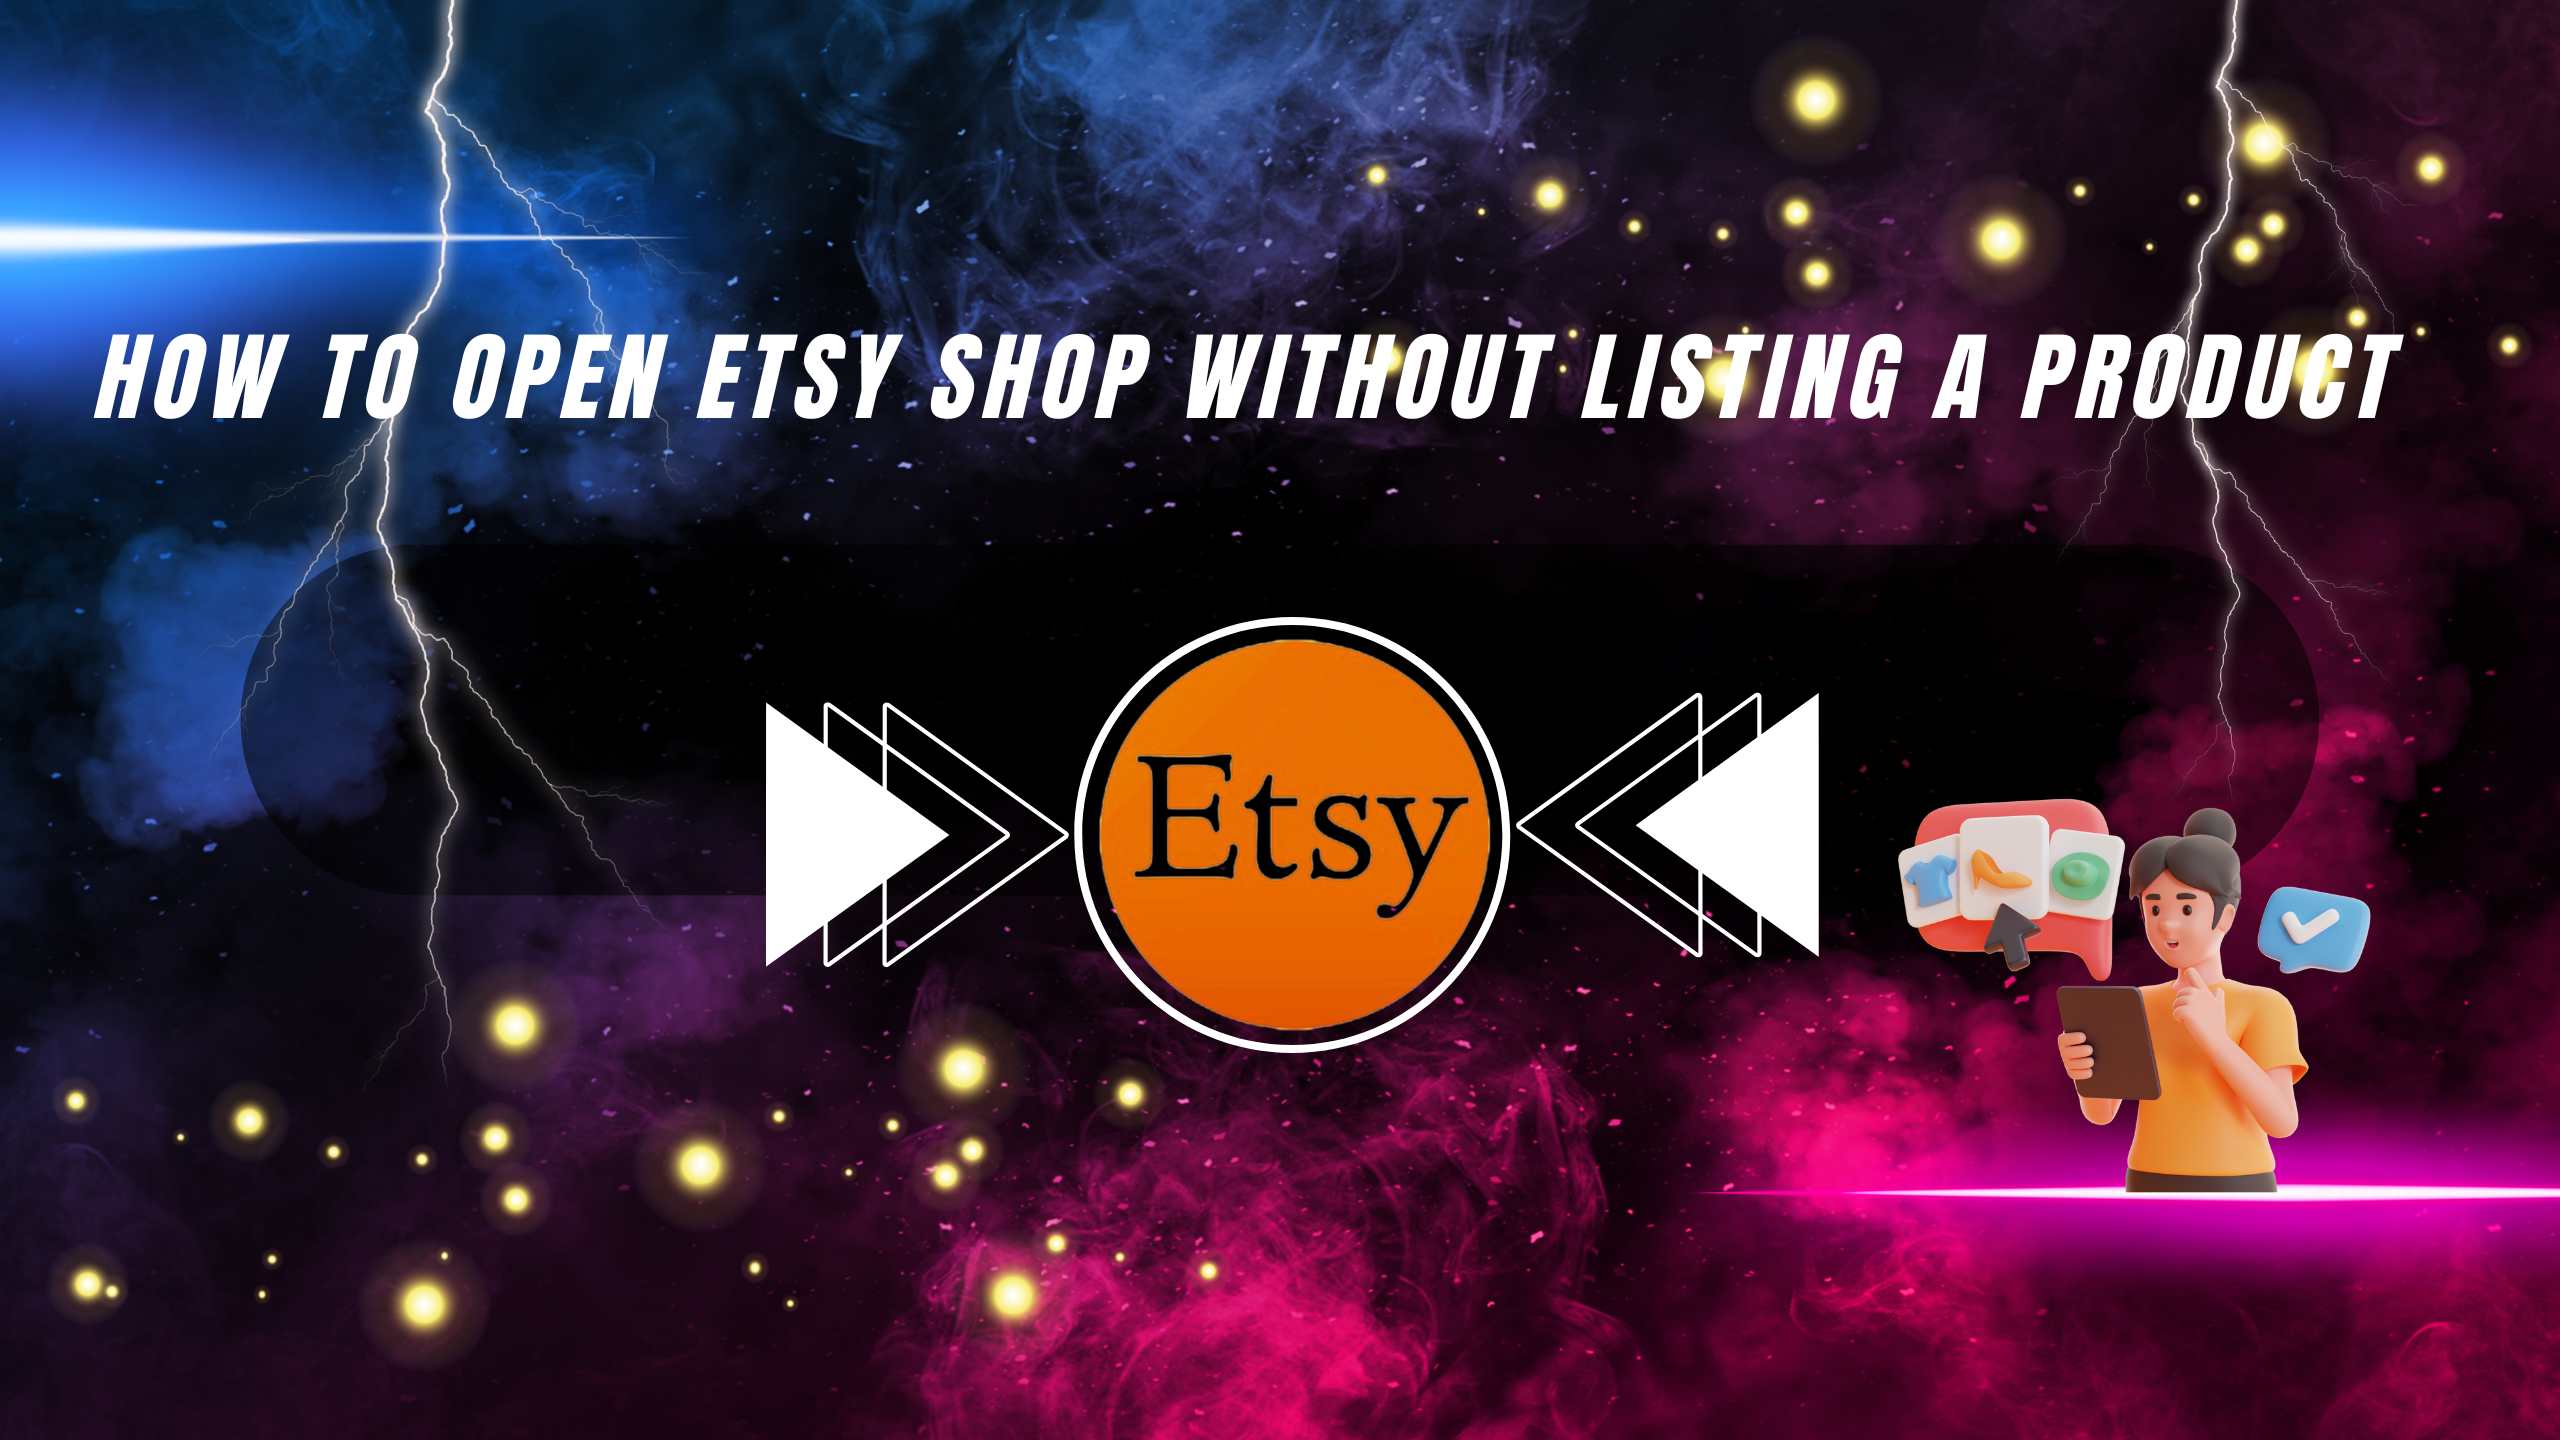 How to Open Etsy Shop Without Listing a Product